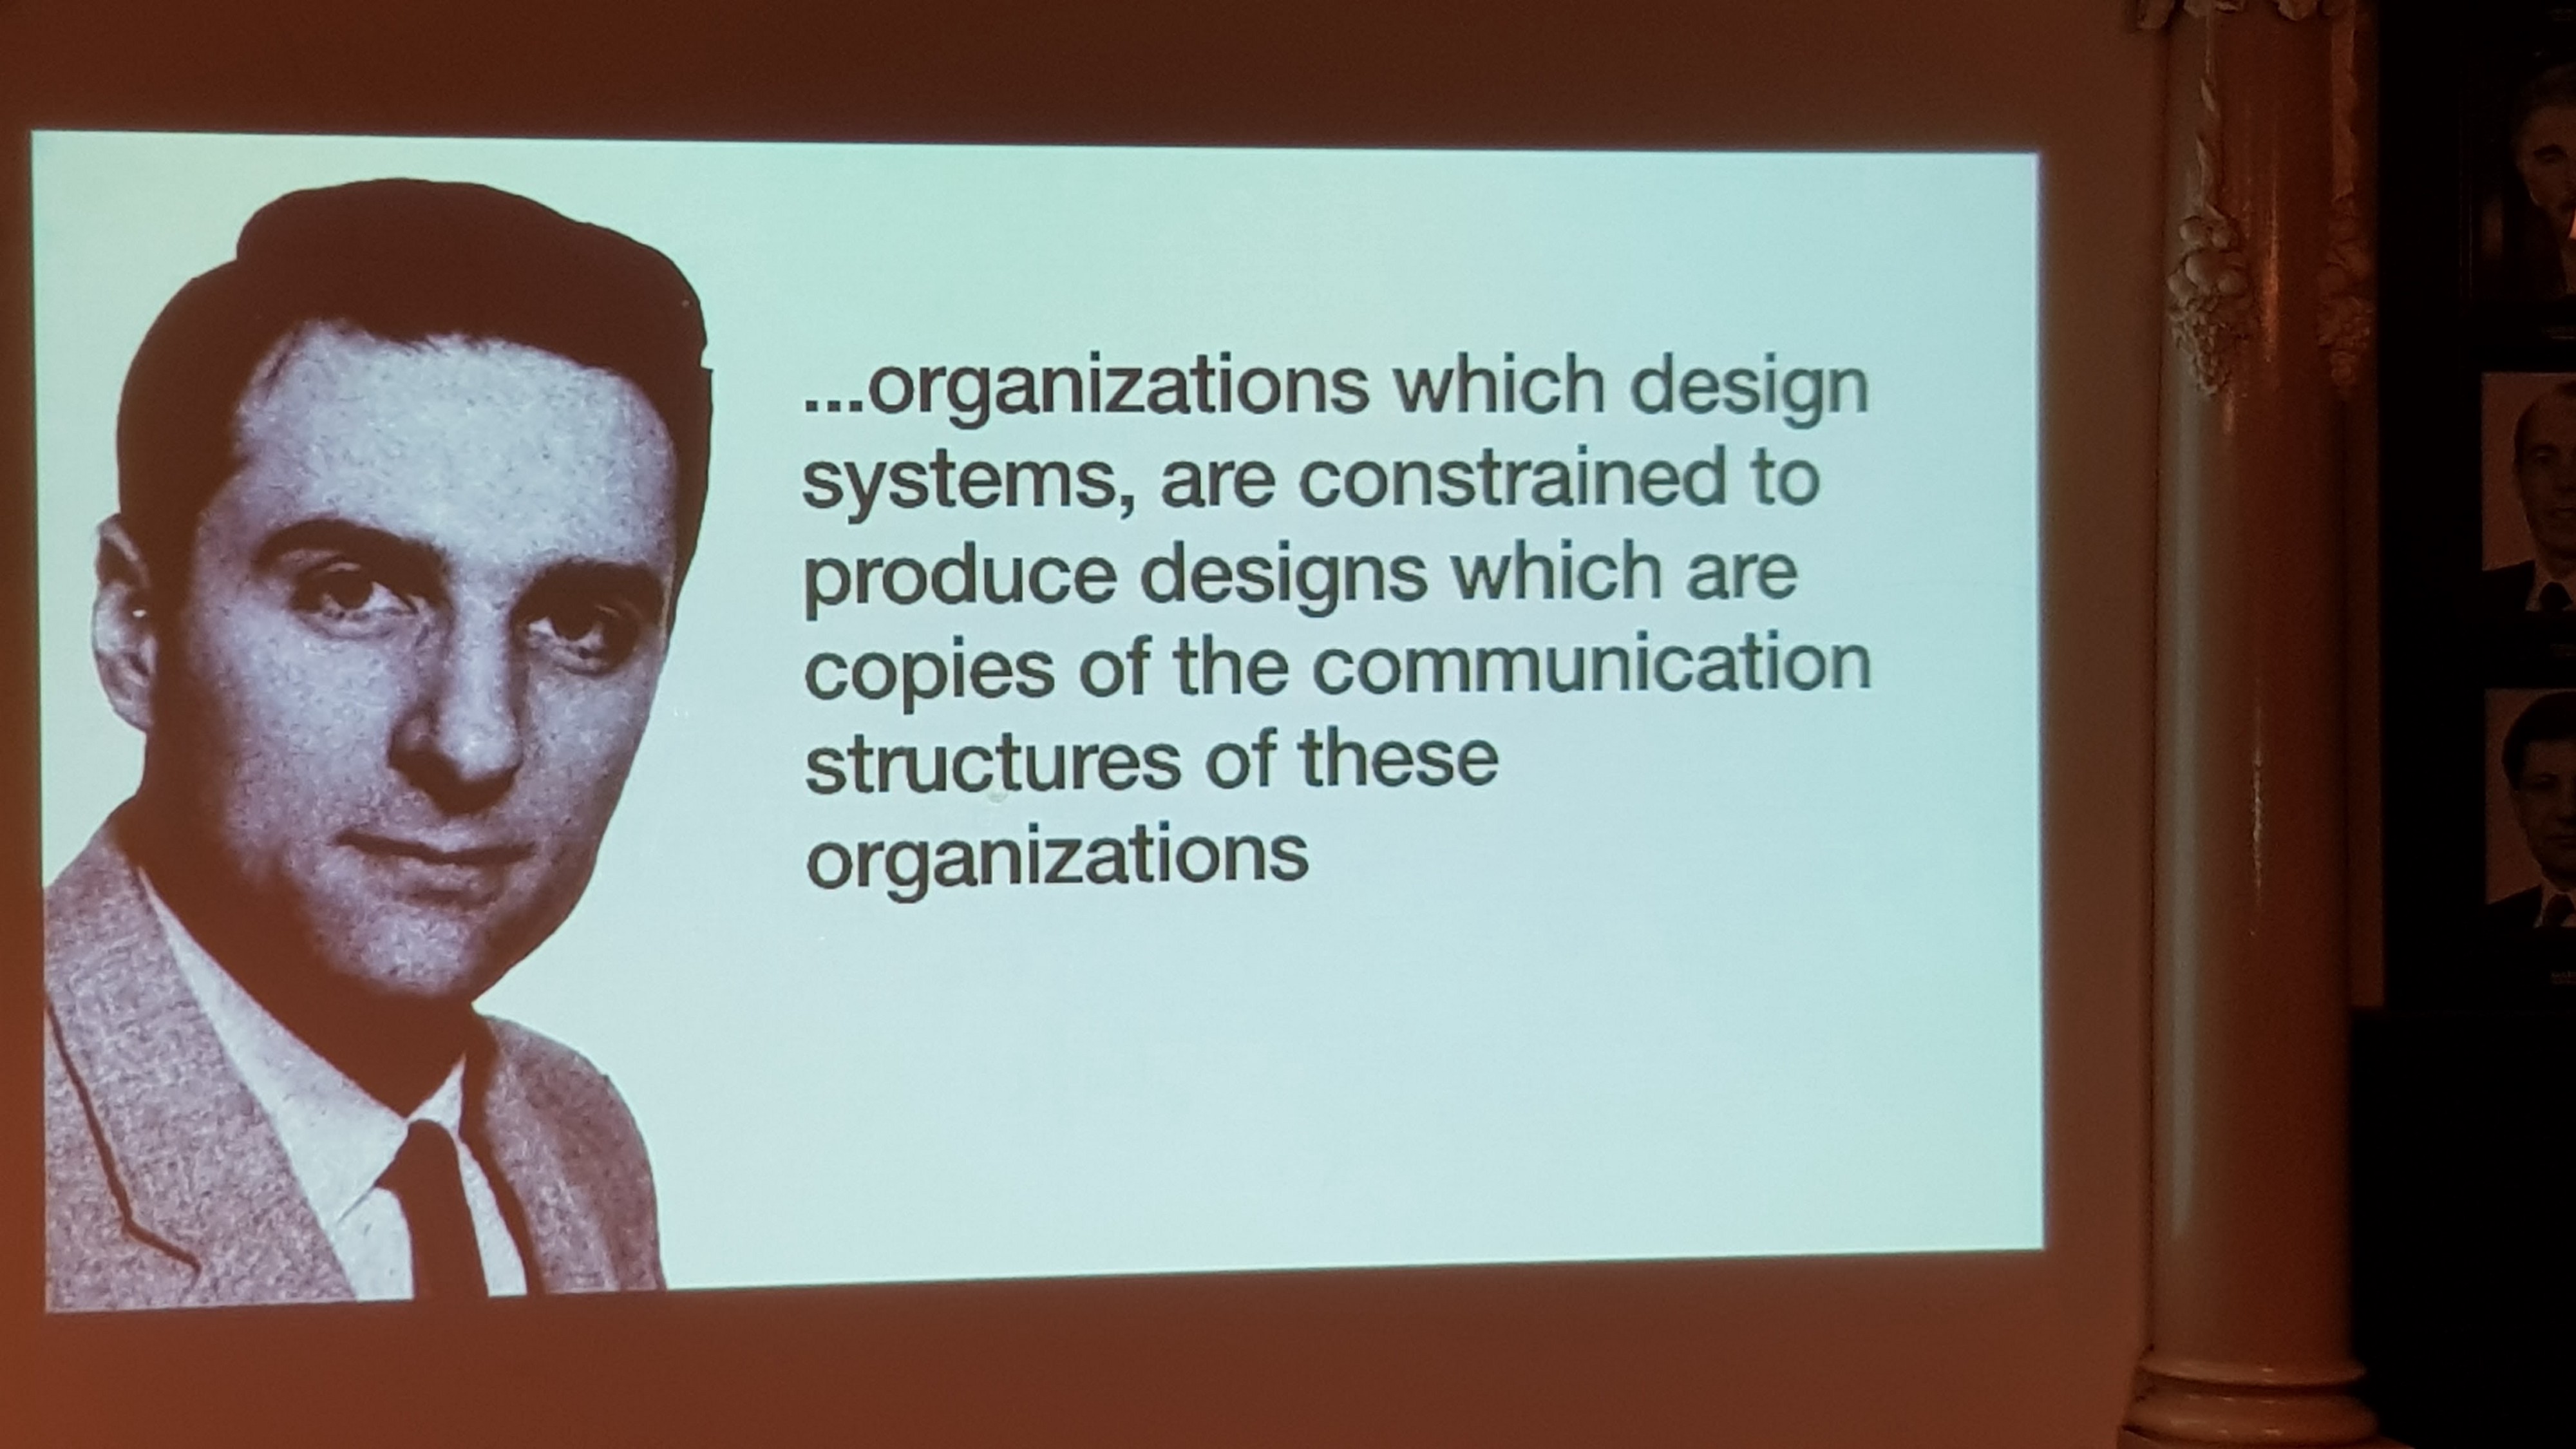 **Conway’s Law: **“organizations which design systems … are constrained to produce designs which are copies of the communication structures of these organizations.”